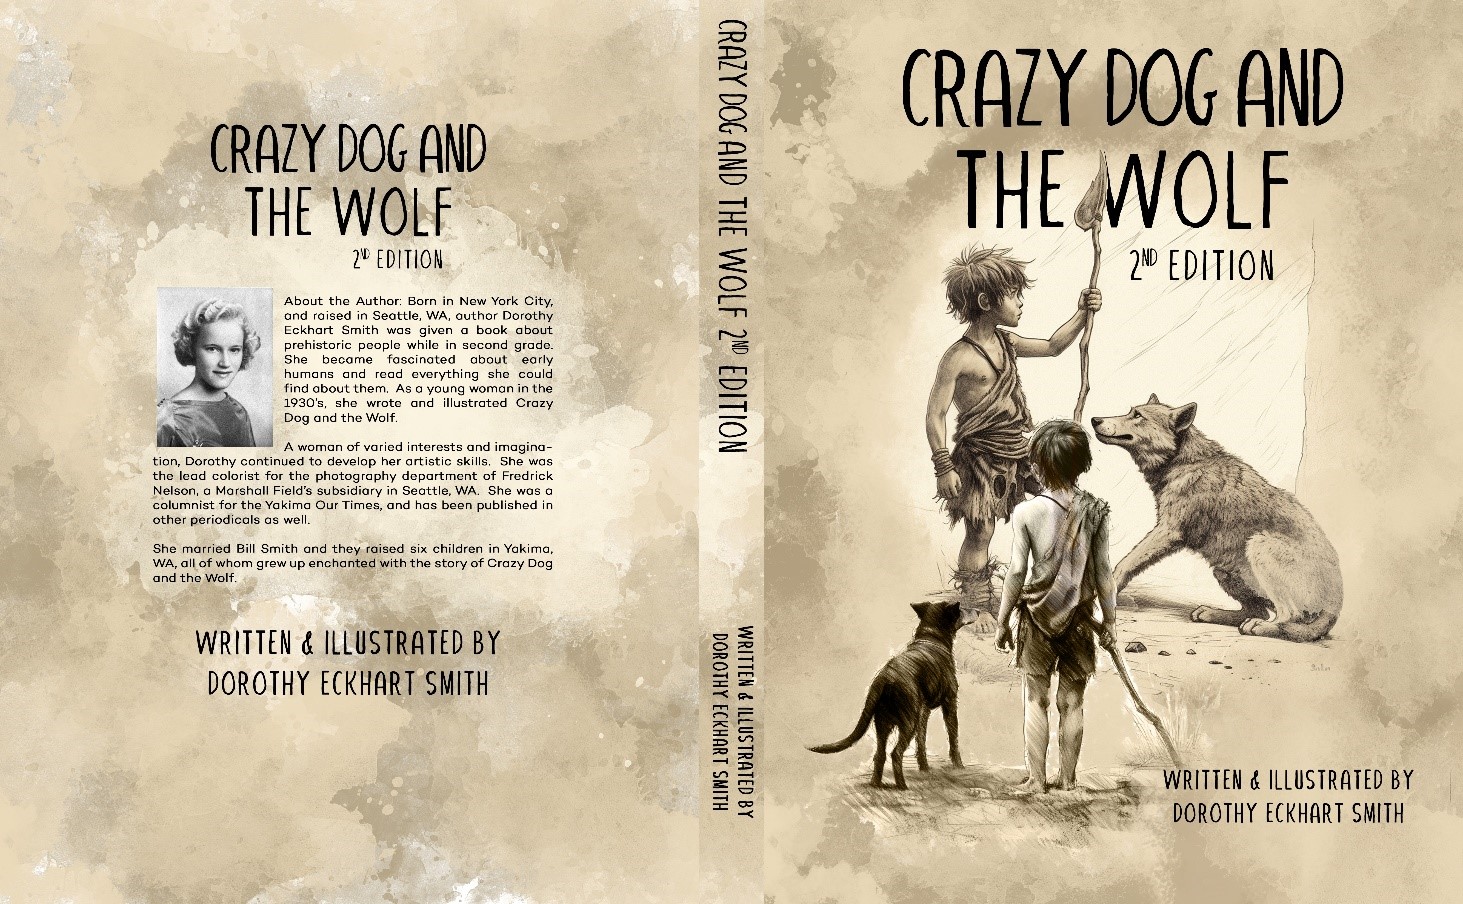 Crazy Dog and The Wolf: A Captivating Tale of Friendship and Adventure